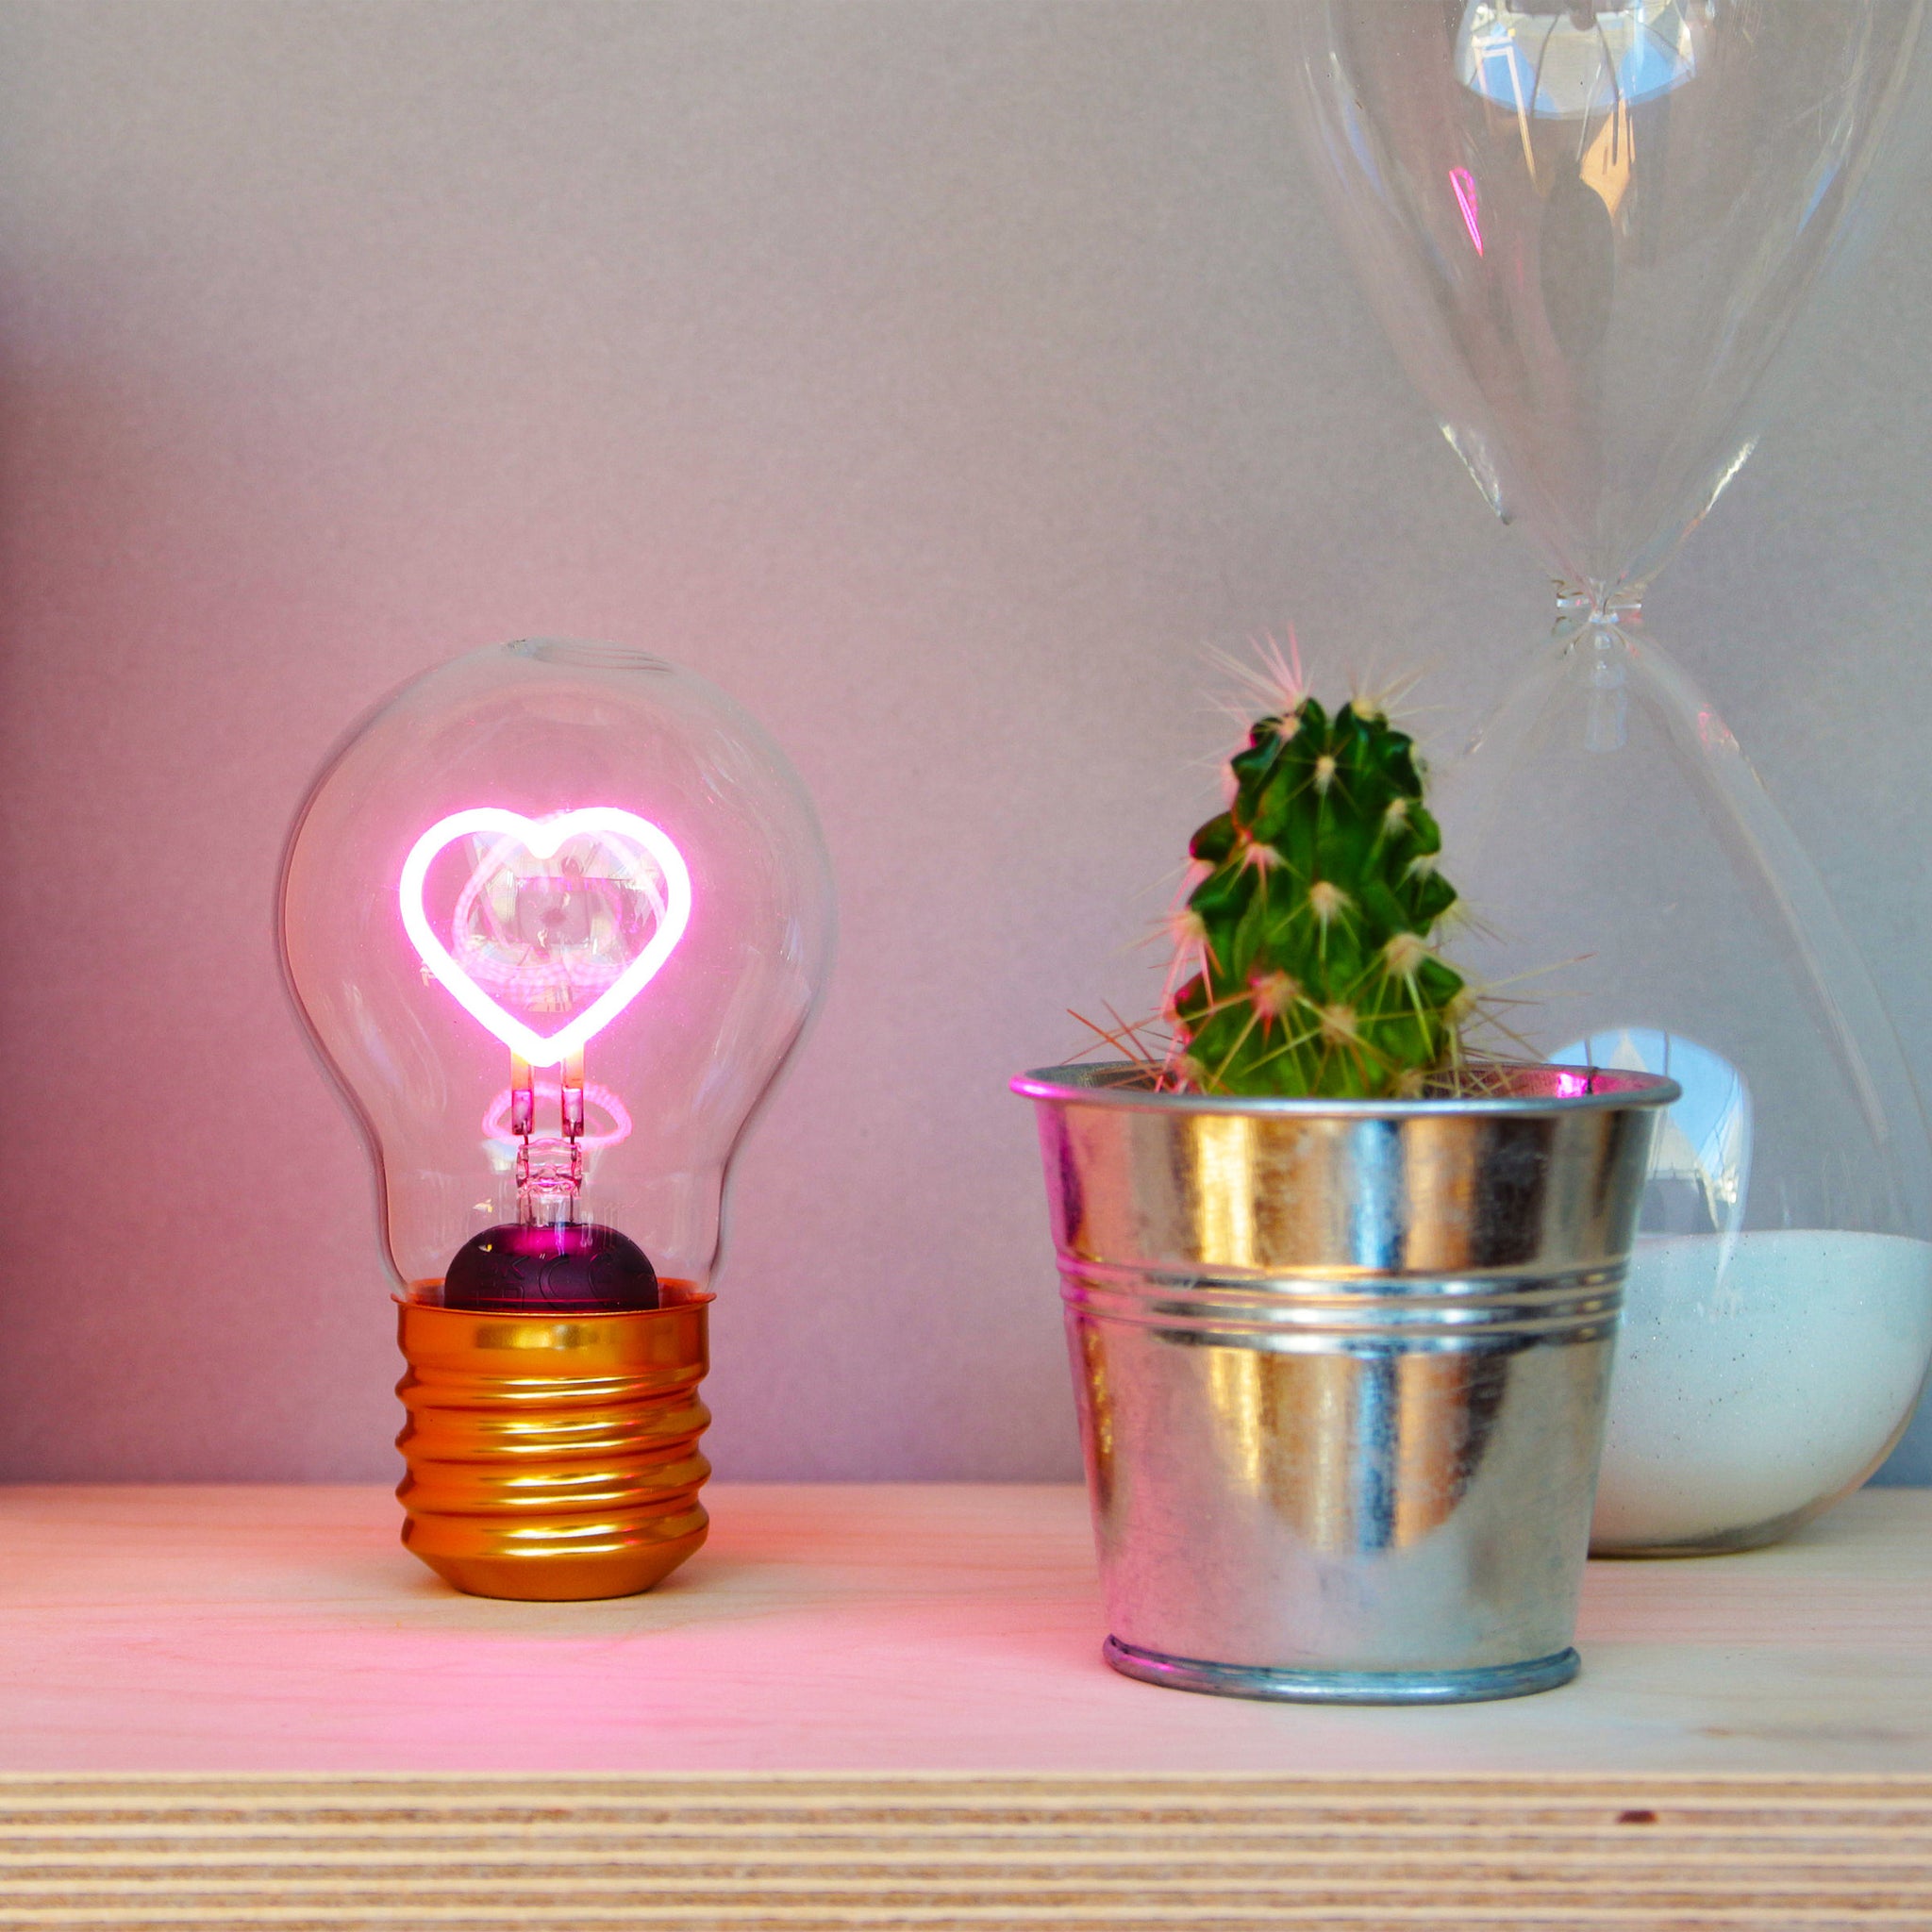 Heart-Shaped LED Lamp with a Neon Twist